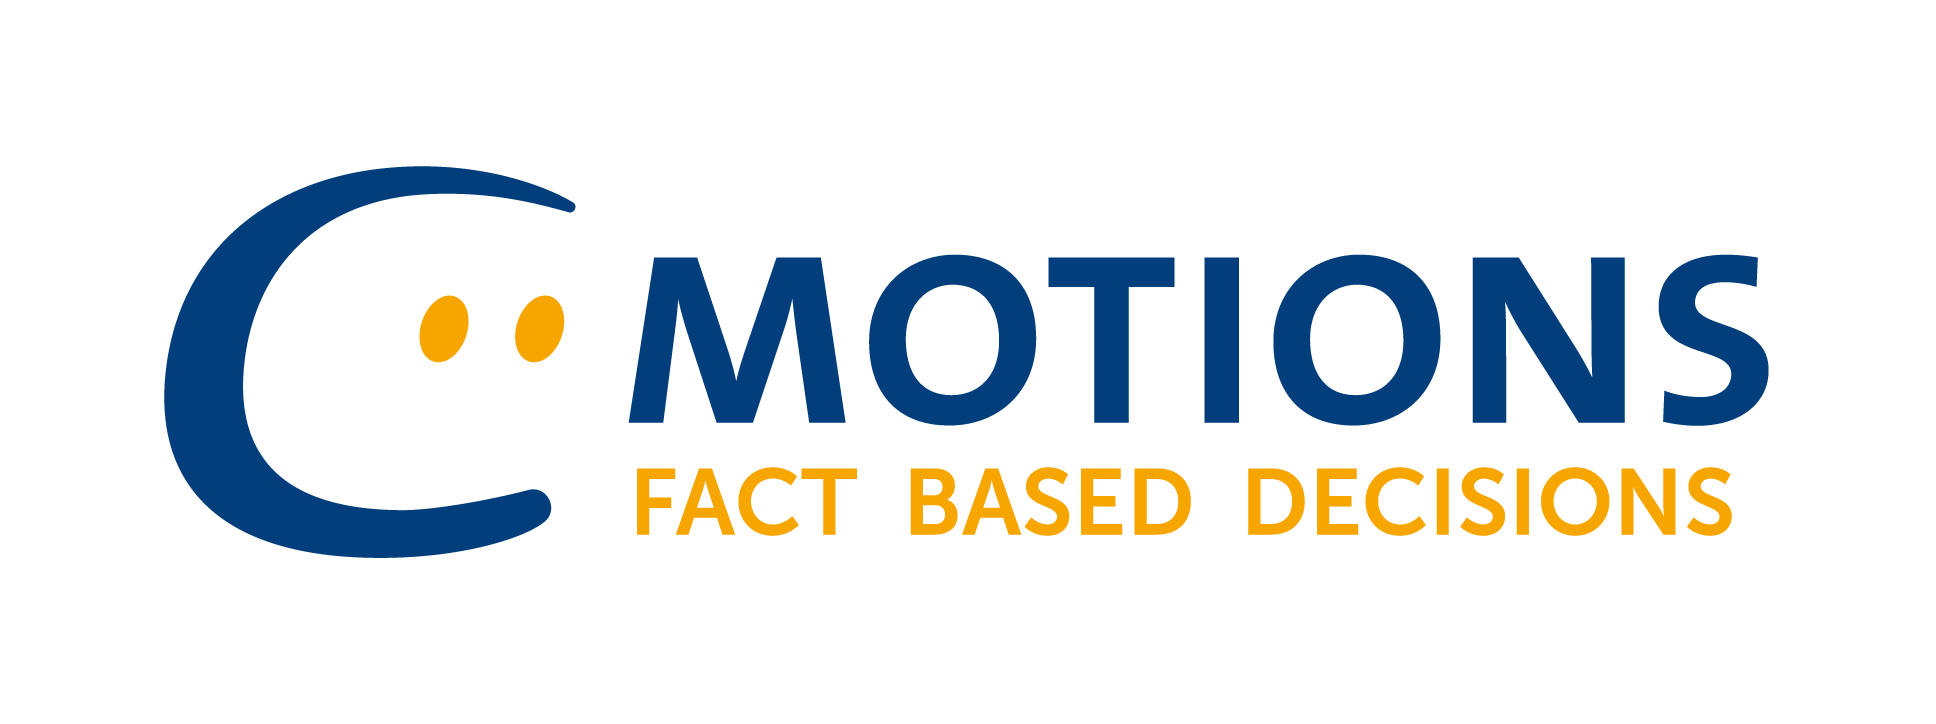 Cmotions-FBD-logo_achtergrond_wit_PNG.png